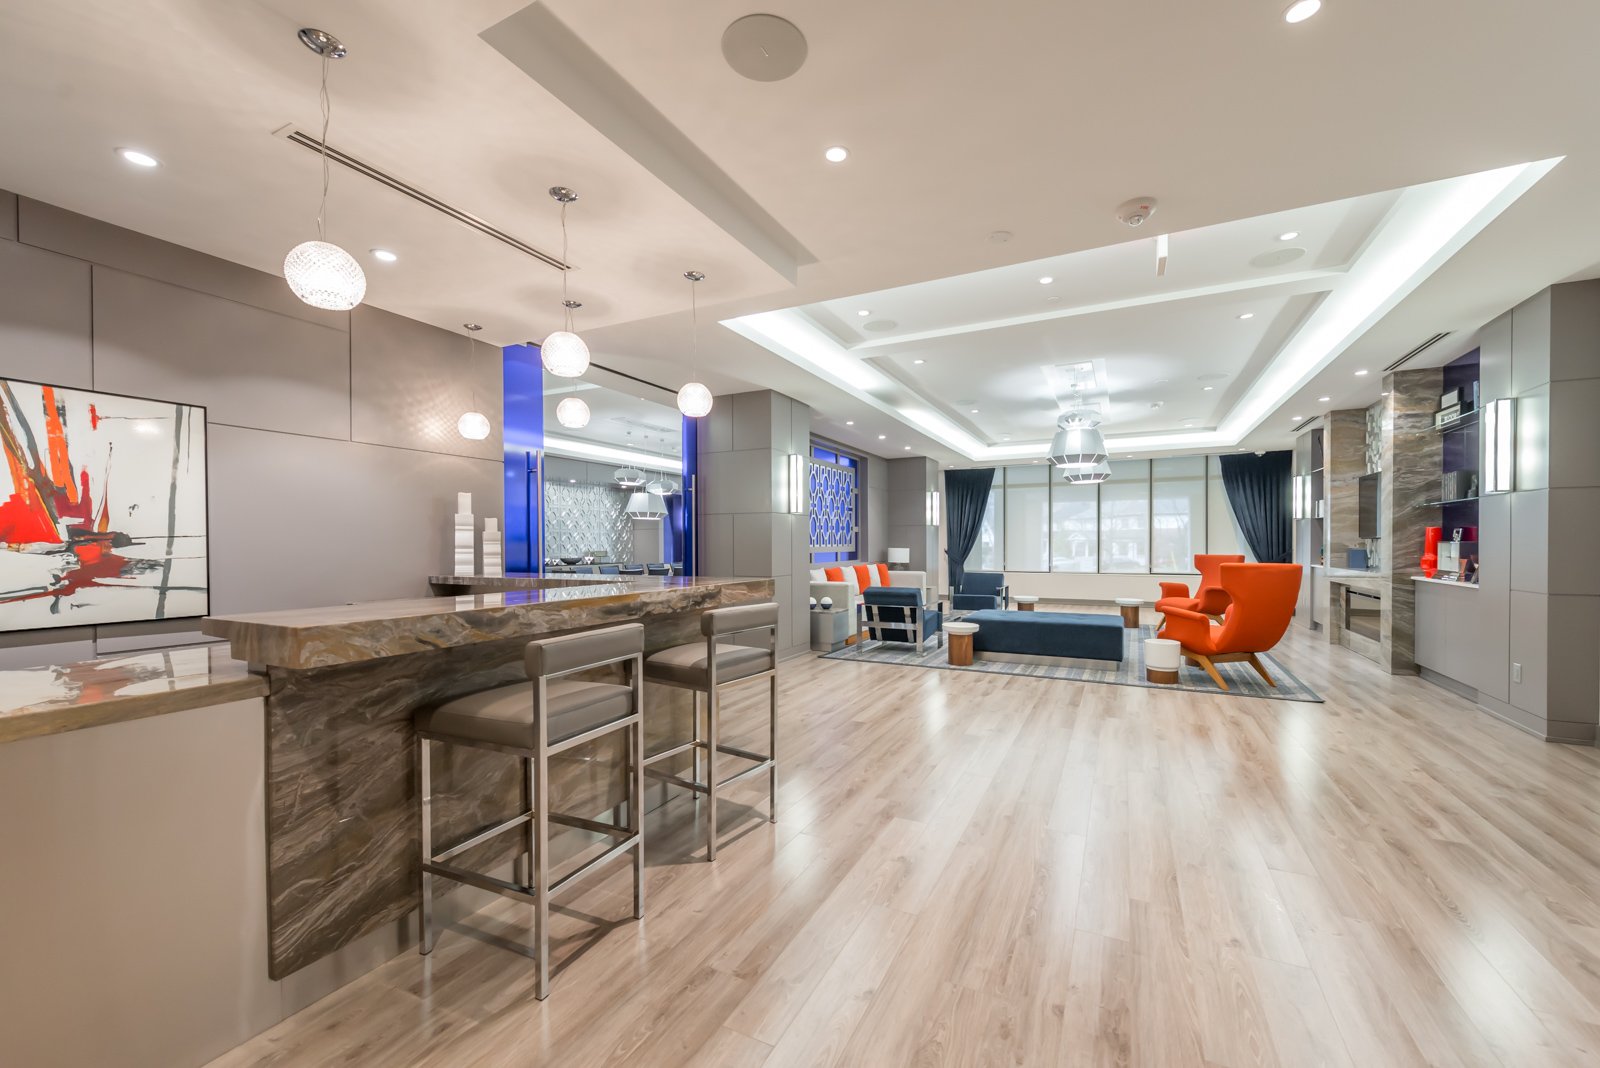 Condo games, party and conference room amenity.